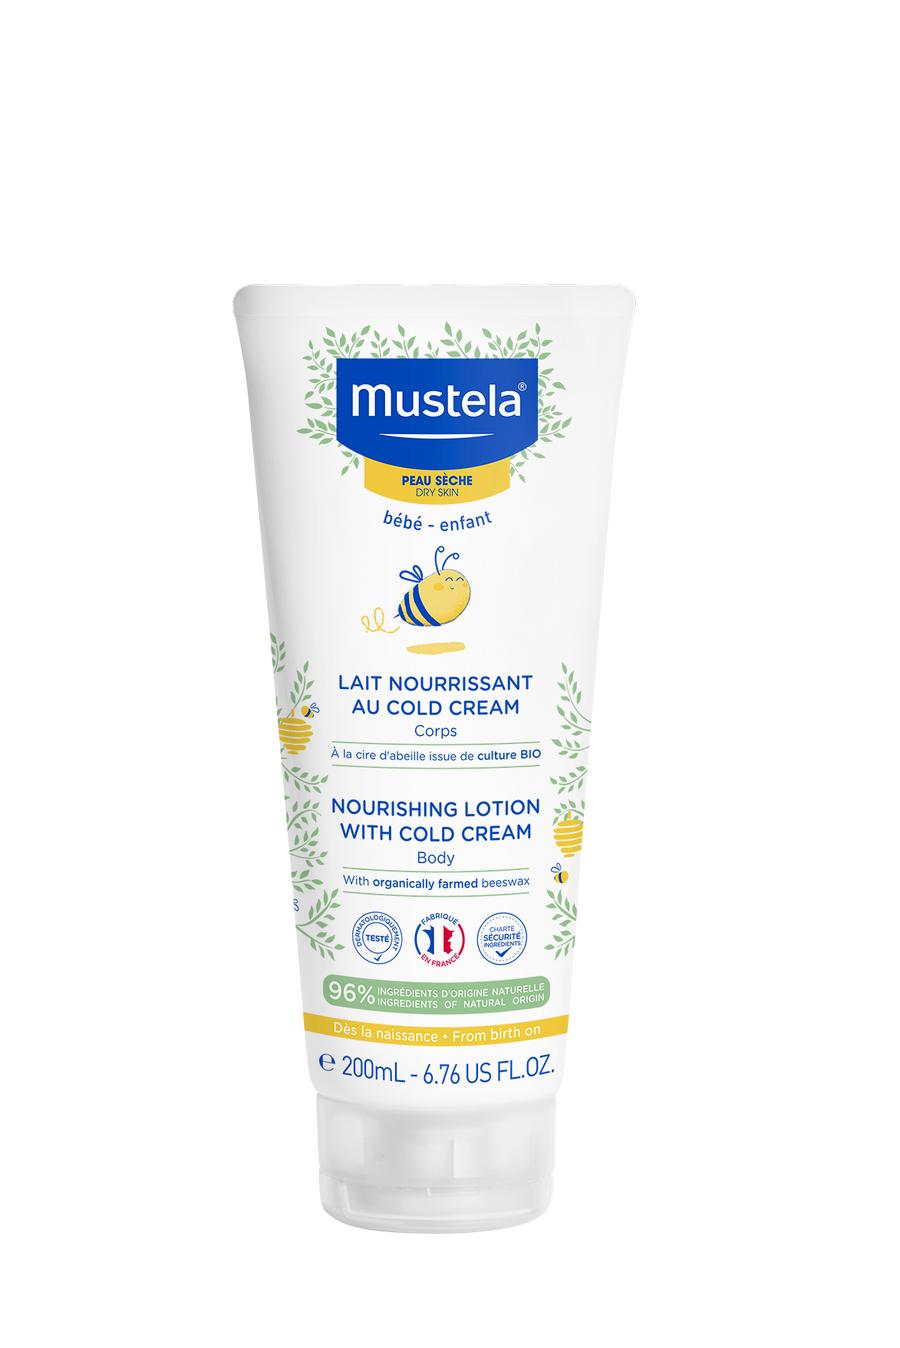 Mustela Nourishing lotion with Cold Cream and Organic beeswax (200ml)